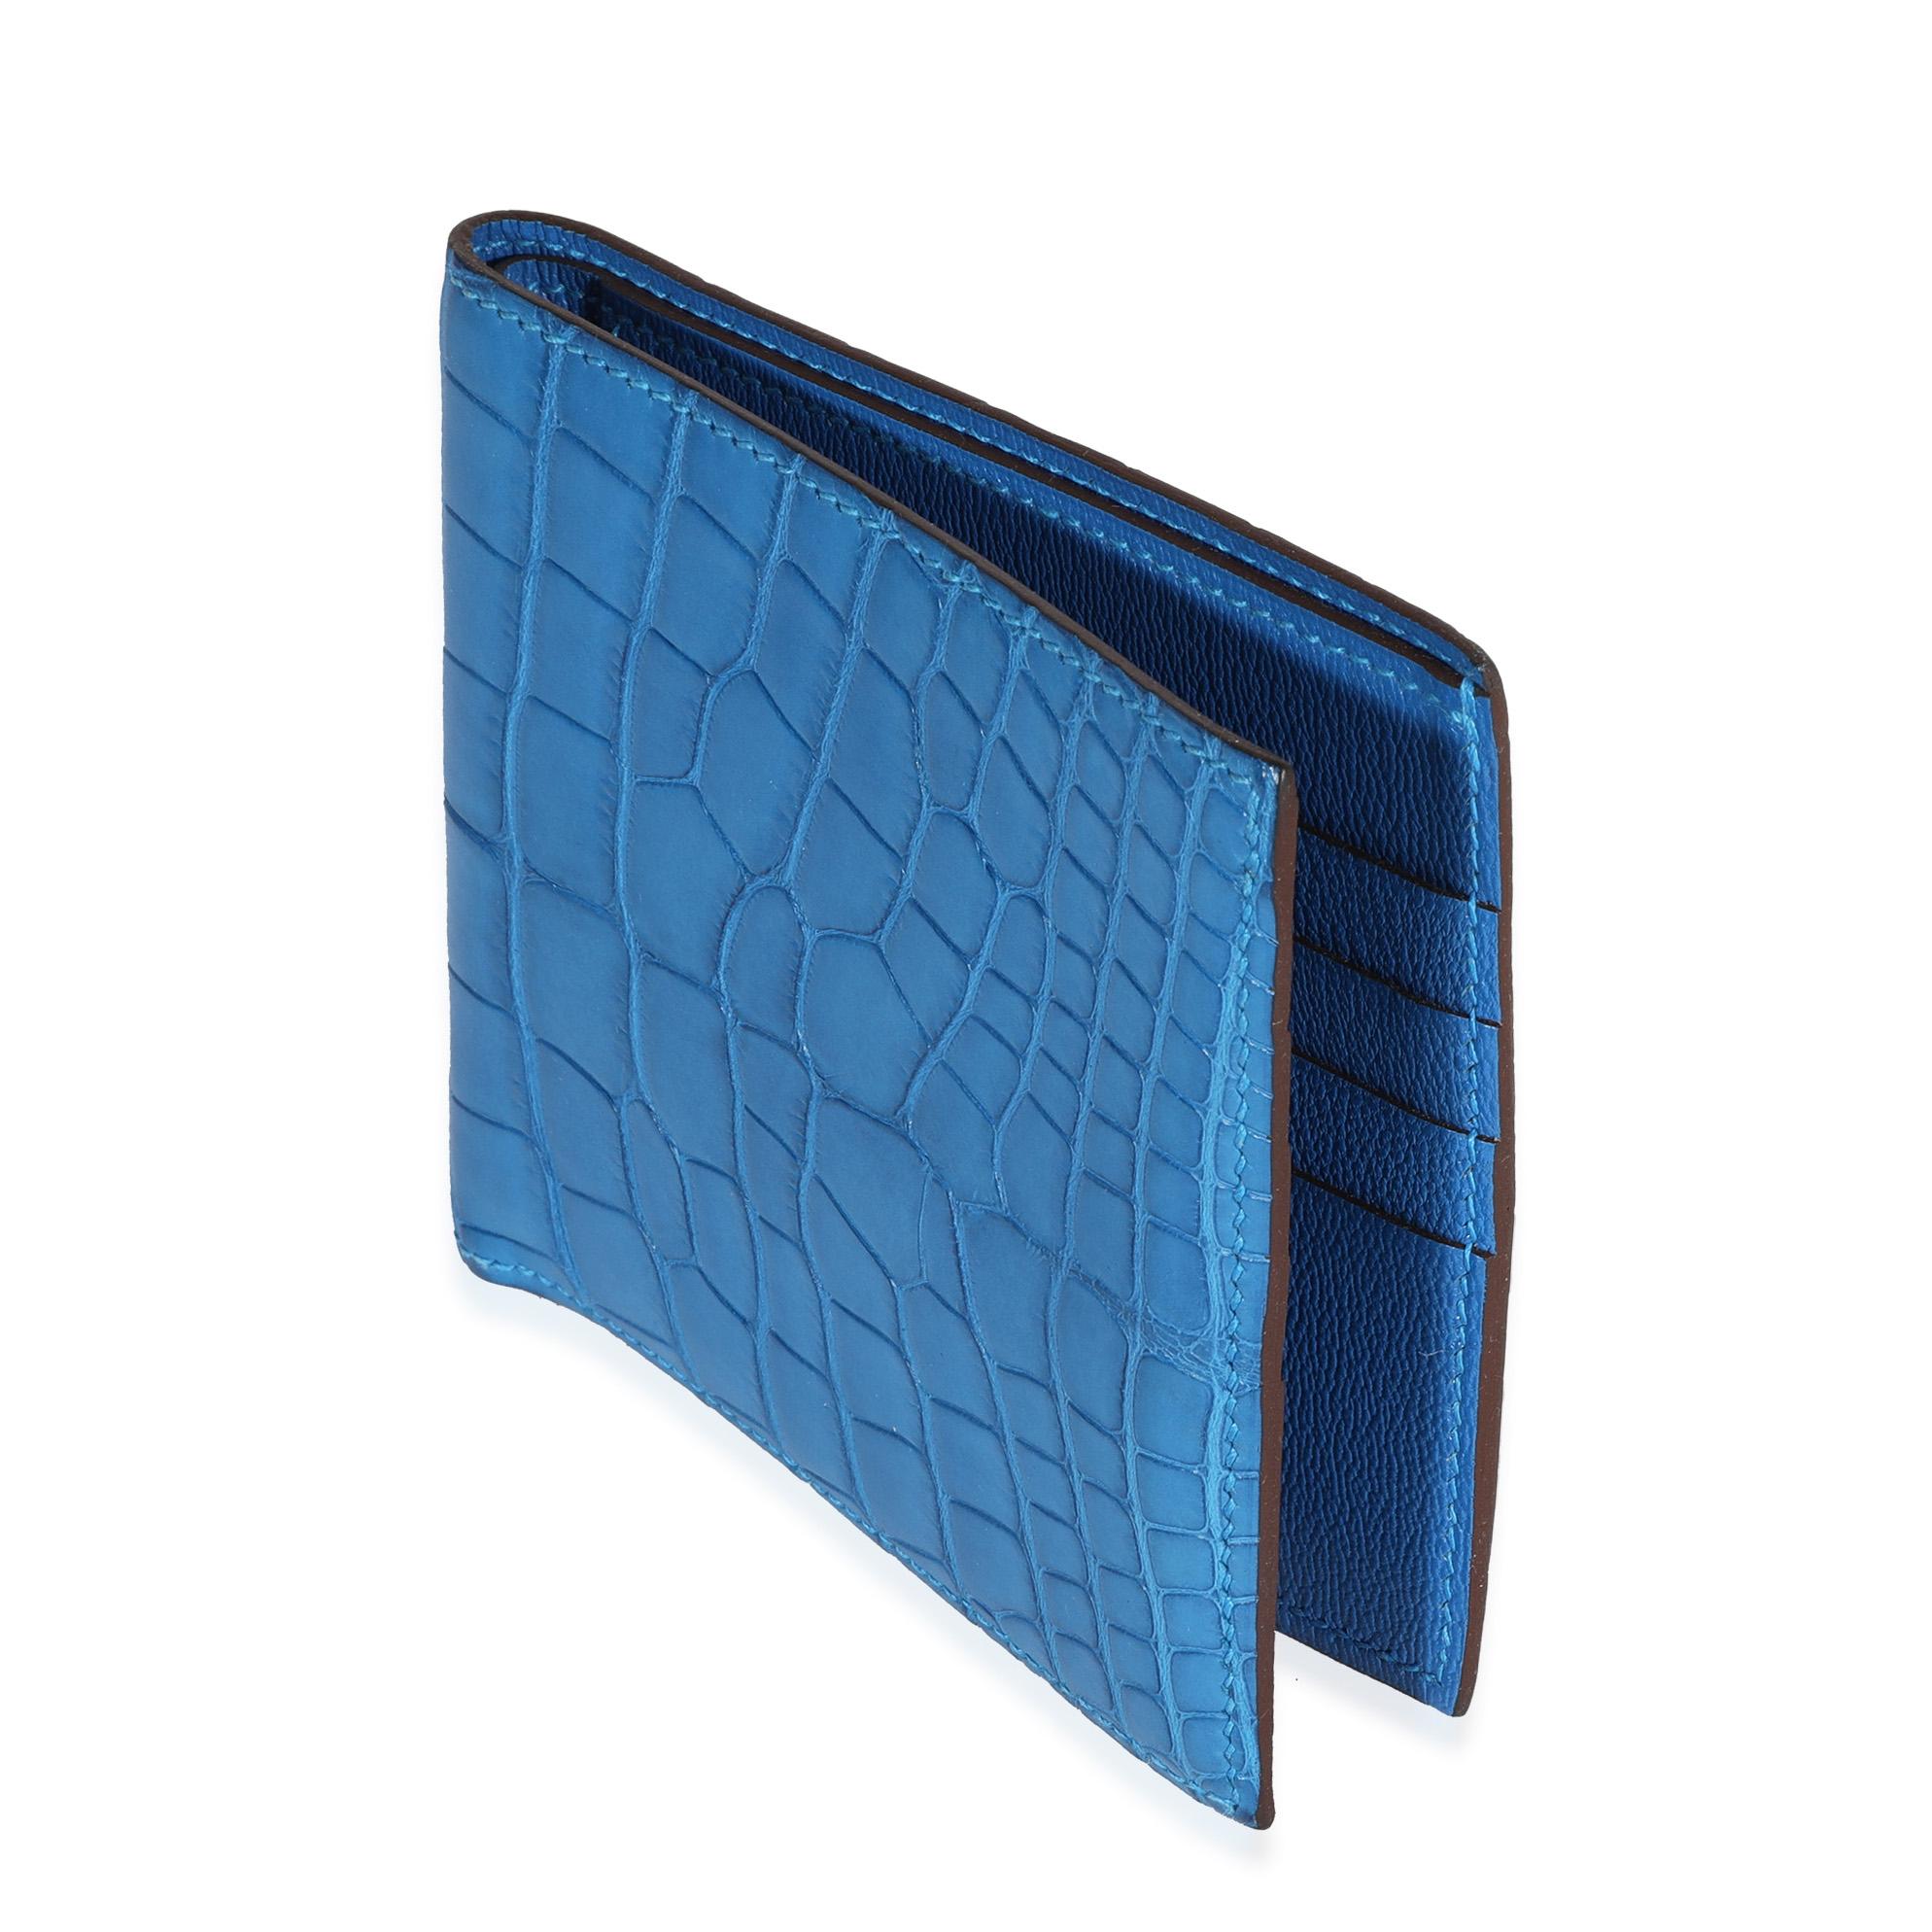 Listing Title: Hermès Bleu Mykonos Matte Alligator MC2 Copernic Wallet
SKU: 117744
MSRP: 4750.00
Condition: Pre-owned 
Handbag Condition: Never Worn
Condition Comments: Please note: this item can not be shipped to all areas.
Brand: Hermès
Model: MC2